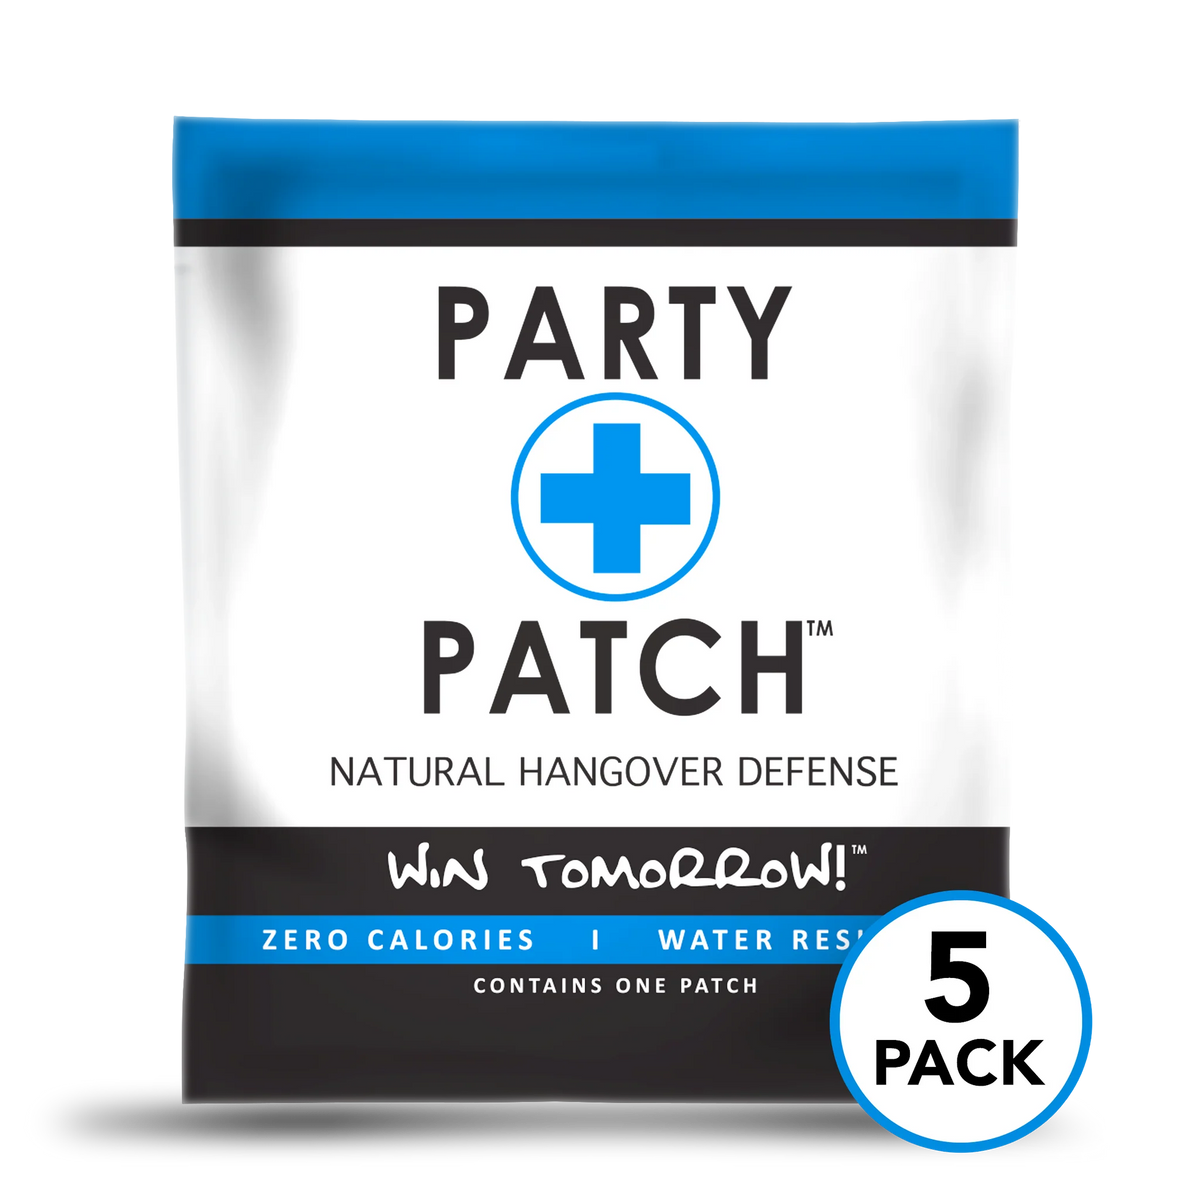 Party Patch  #1 Hangover Patch ✚𝐍𝐀𝐓𝐔𝐑𝐀𝐋 𝐇𝐀𝐍𝐆𝐎𝐕𝐄𝐑